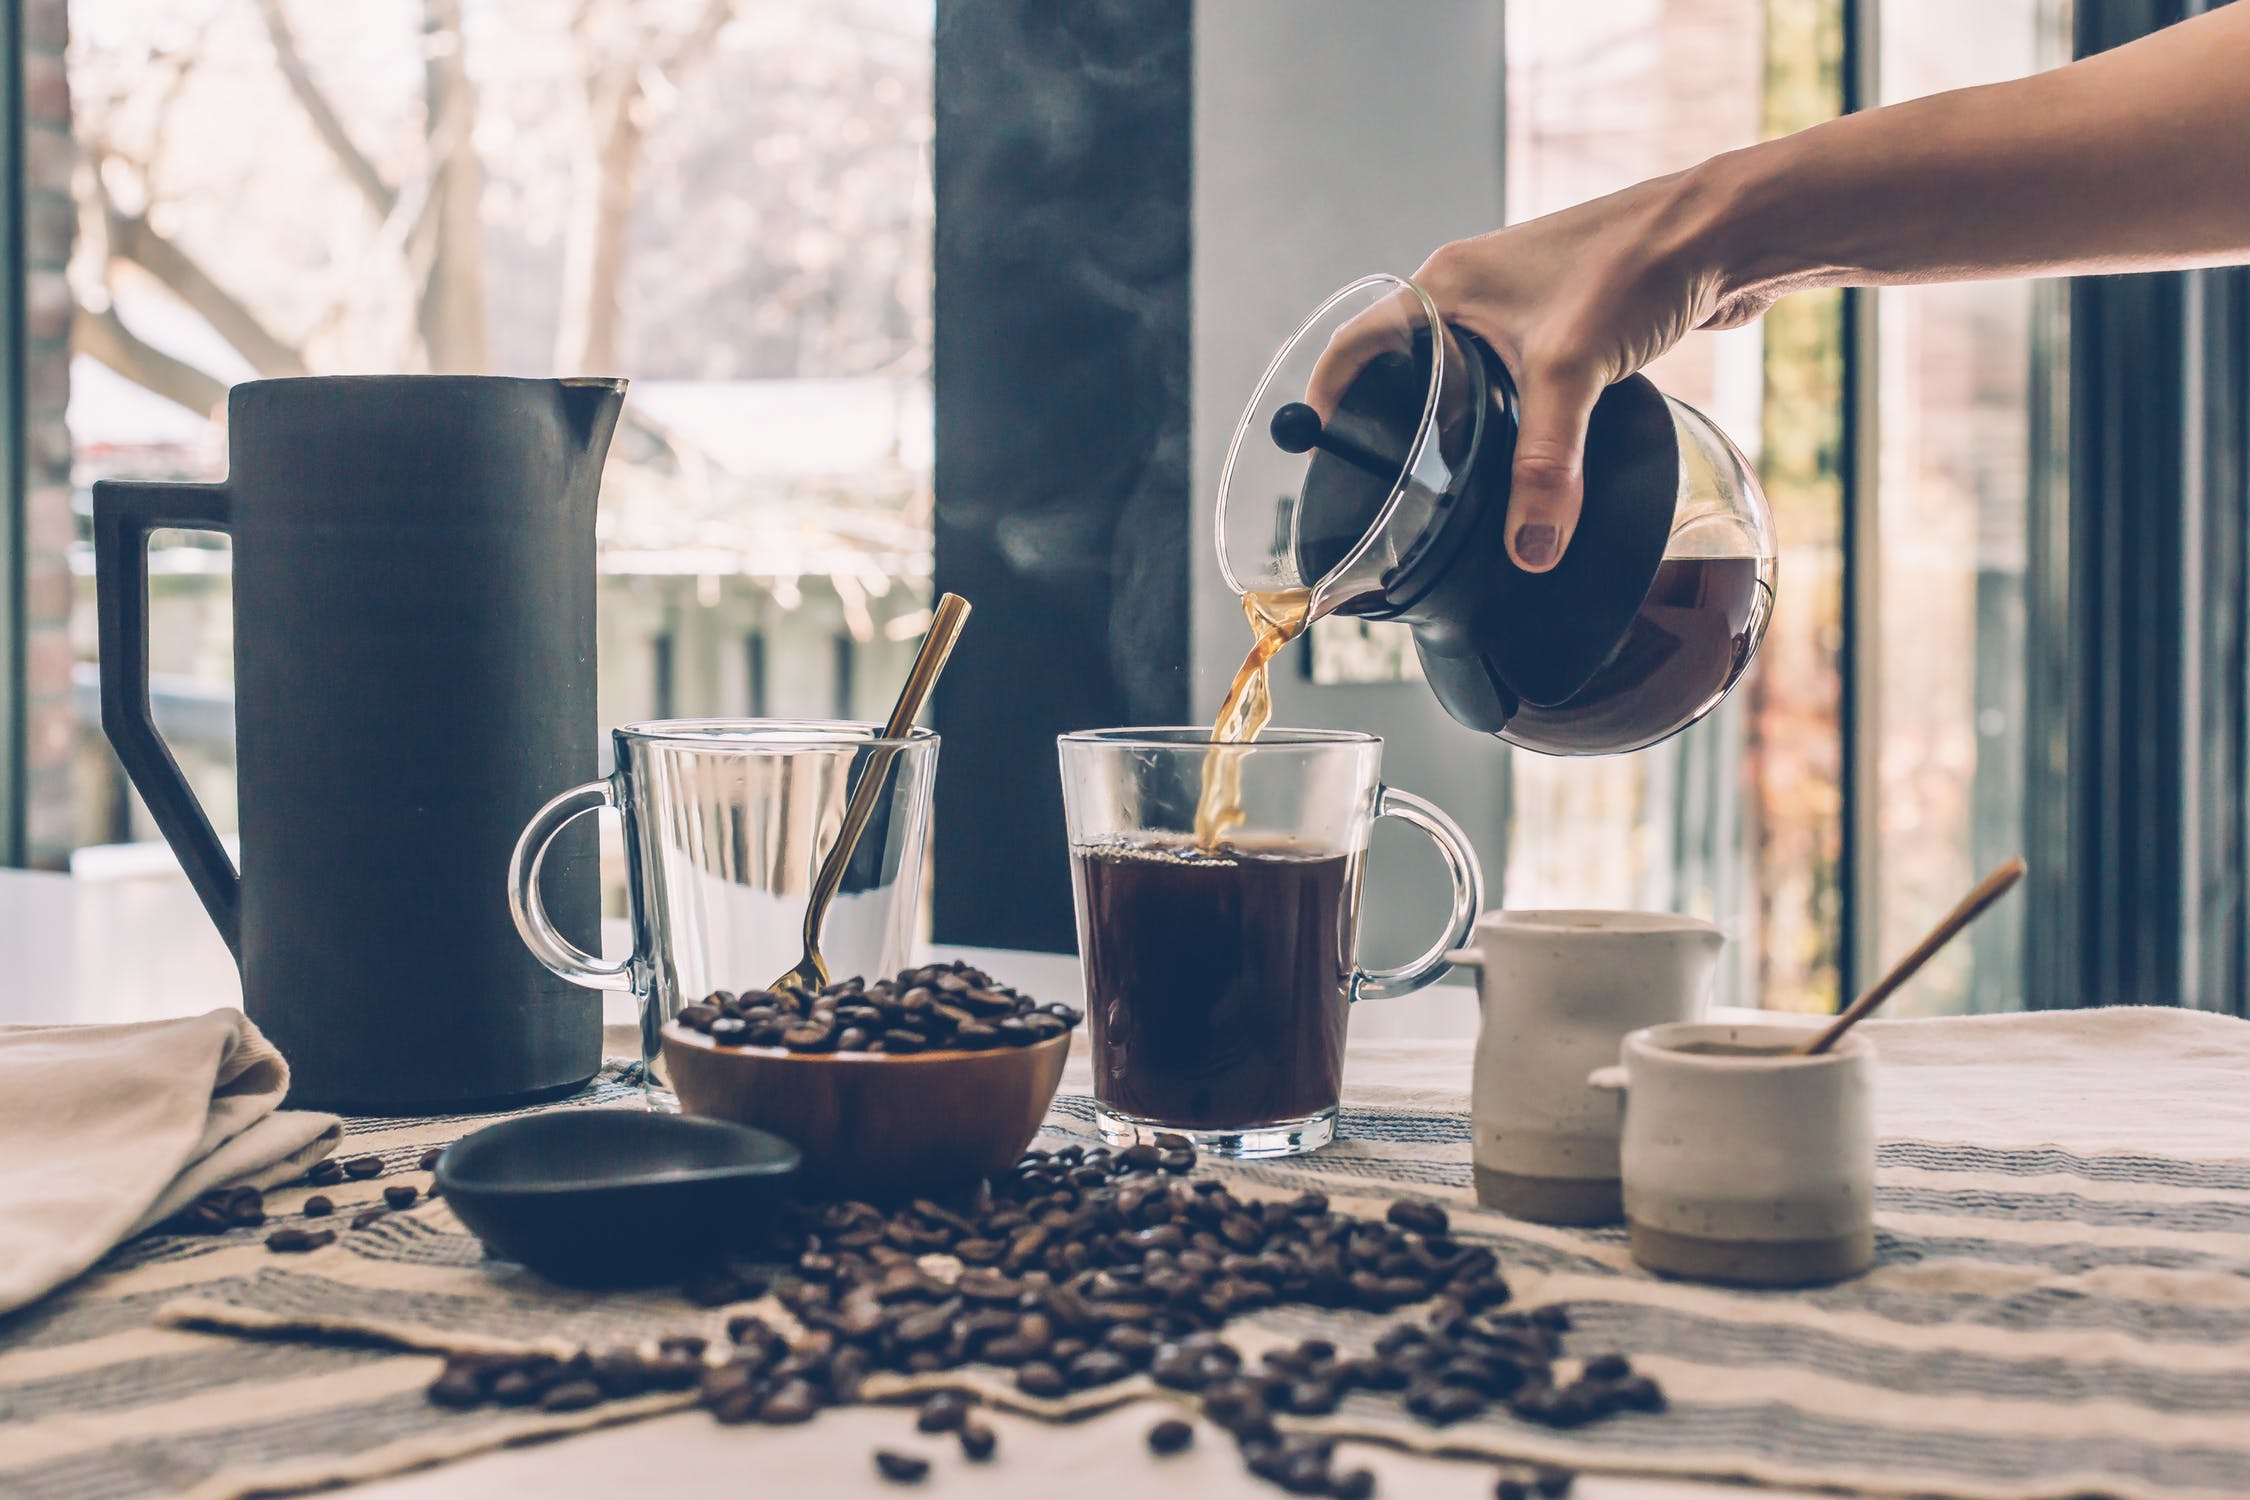 5 Easy Ways to Make Delicious Coffee in the Morning